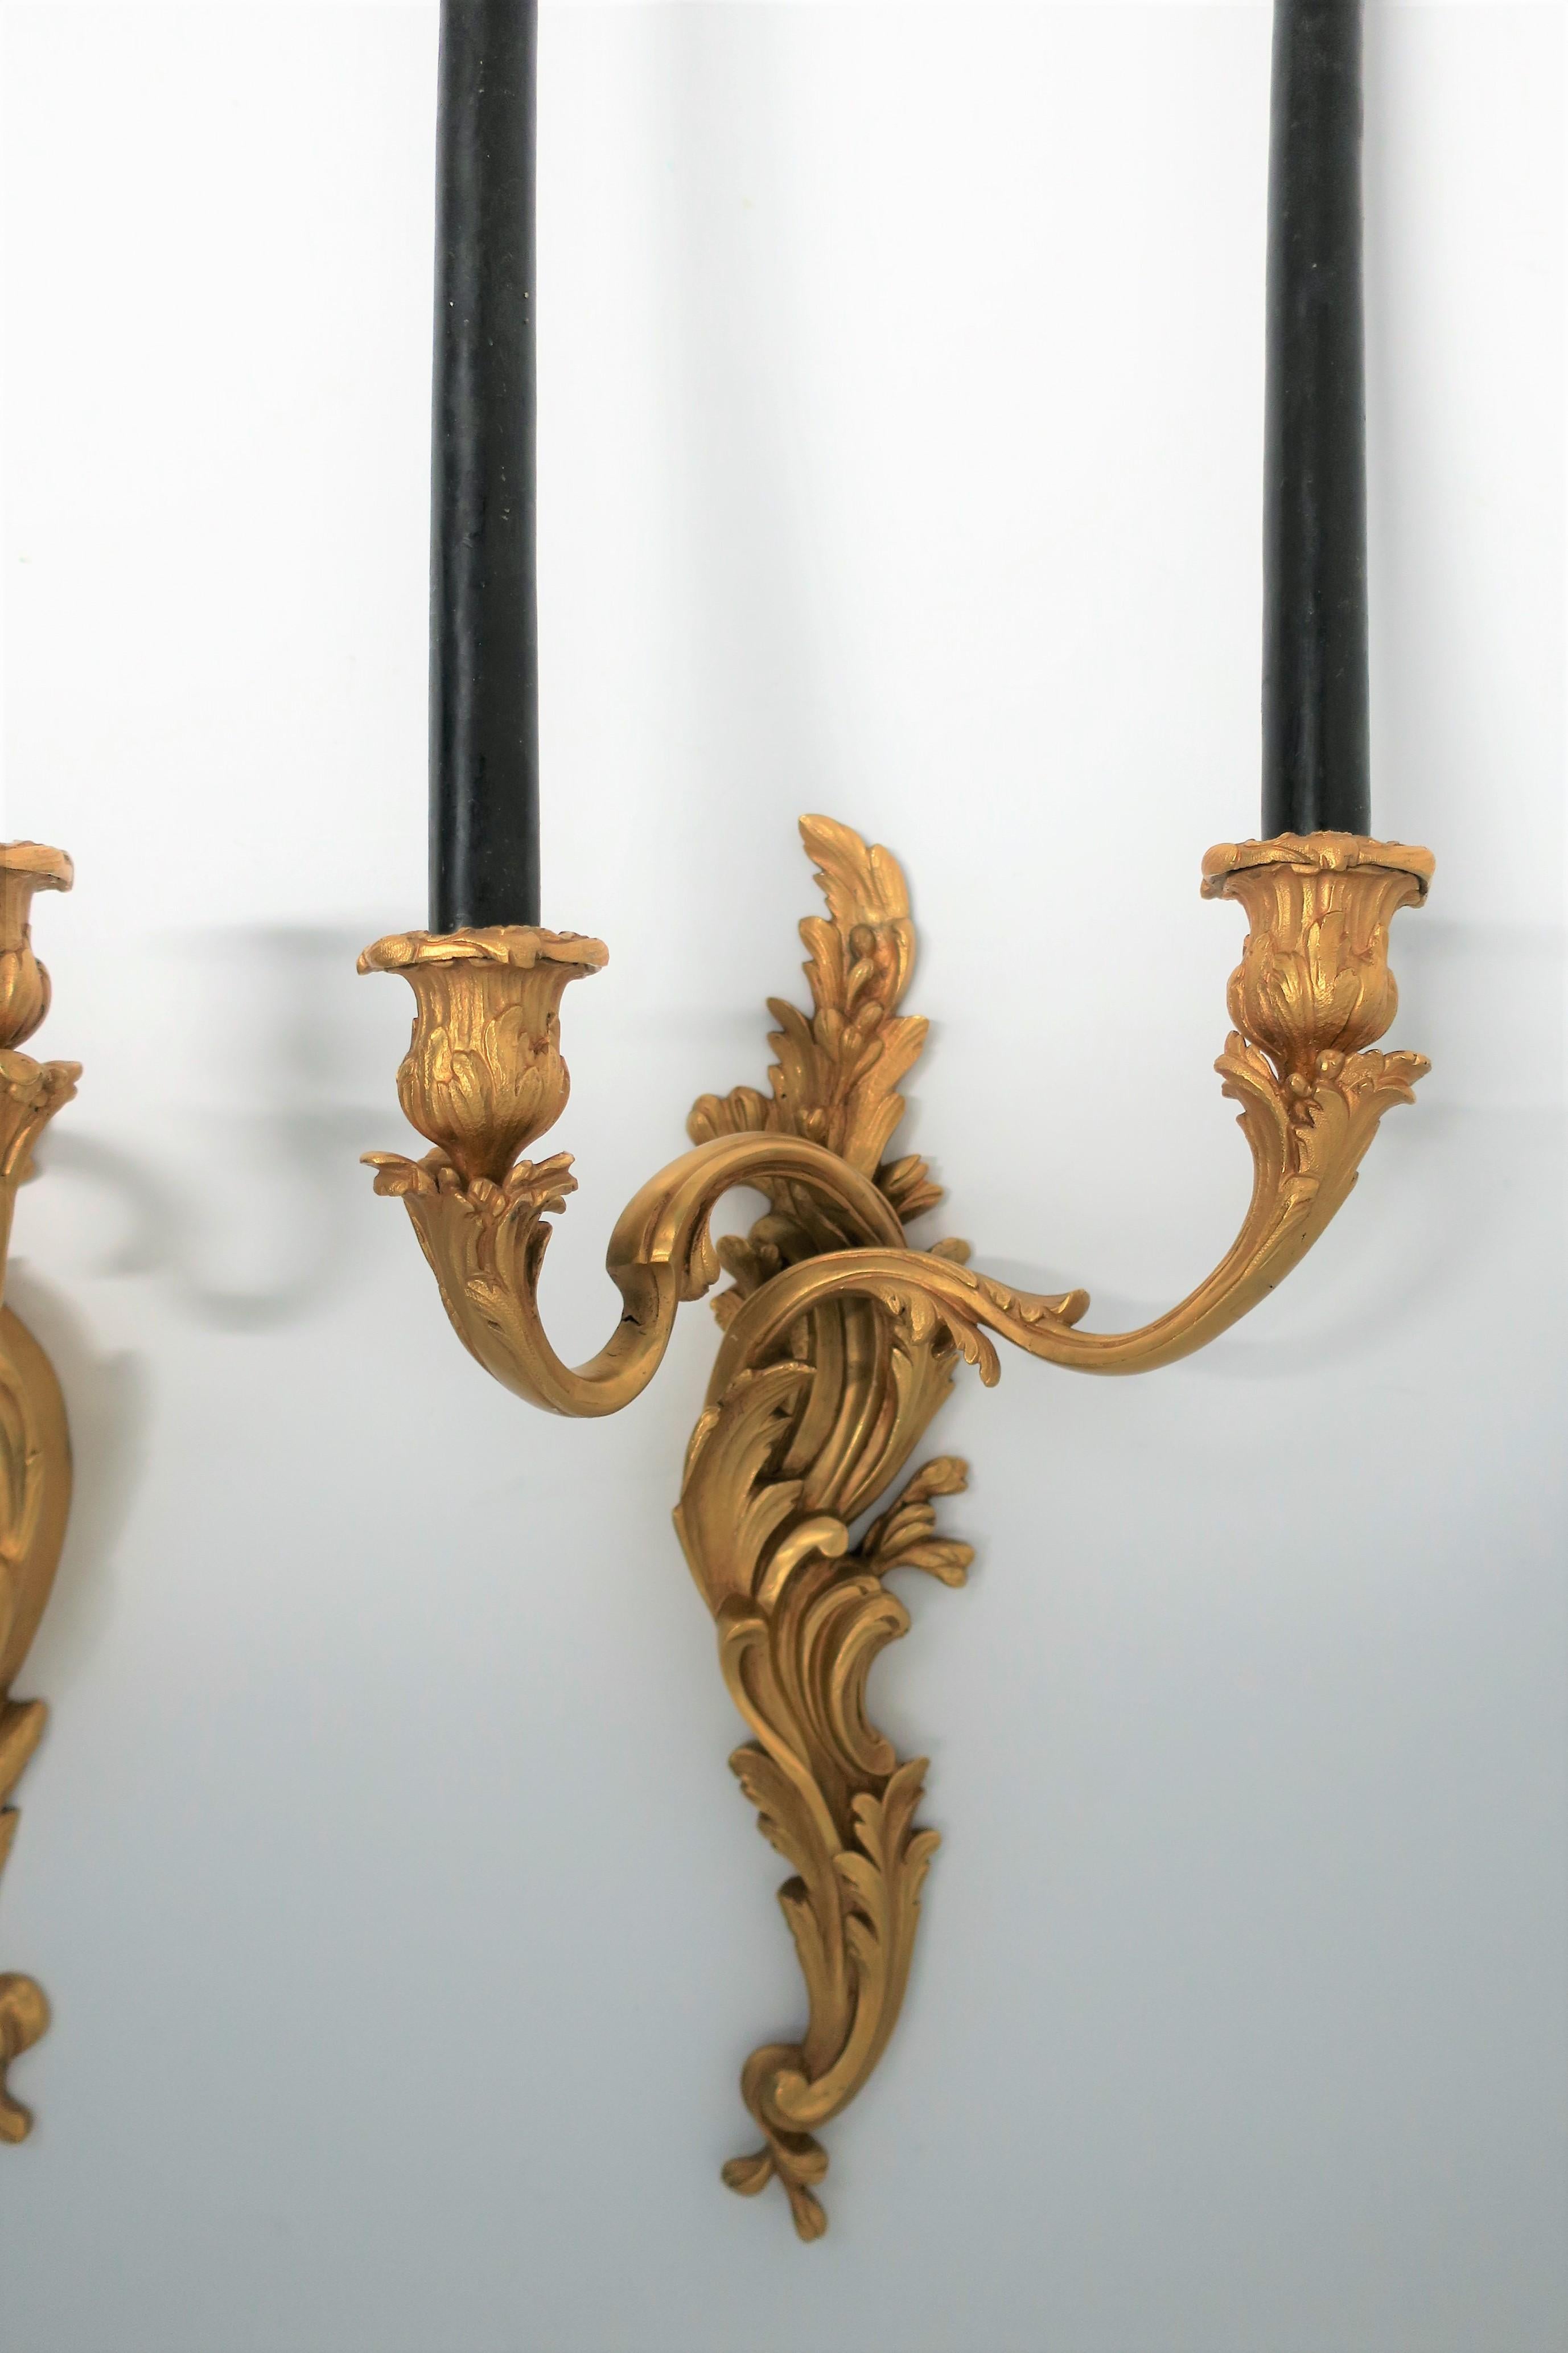 20th Century Pair of Dore Gold Gilt Bronze Rococo Candlestick Wall Sconces